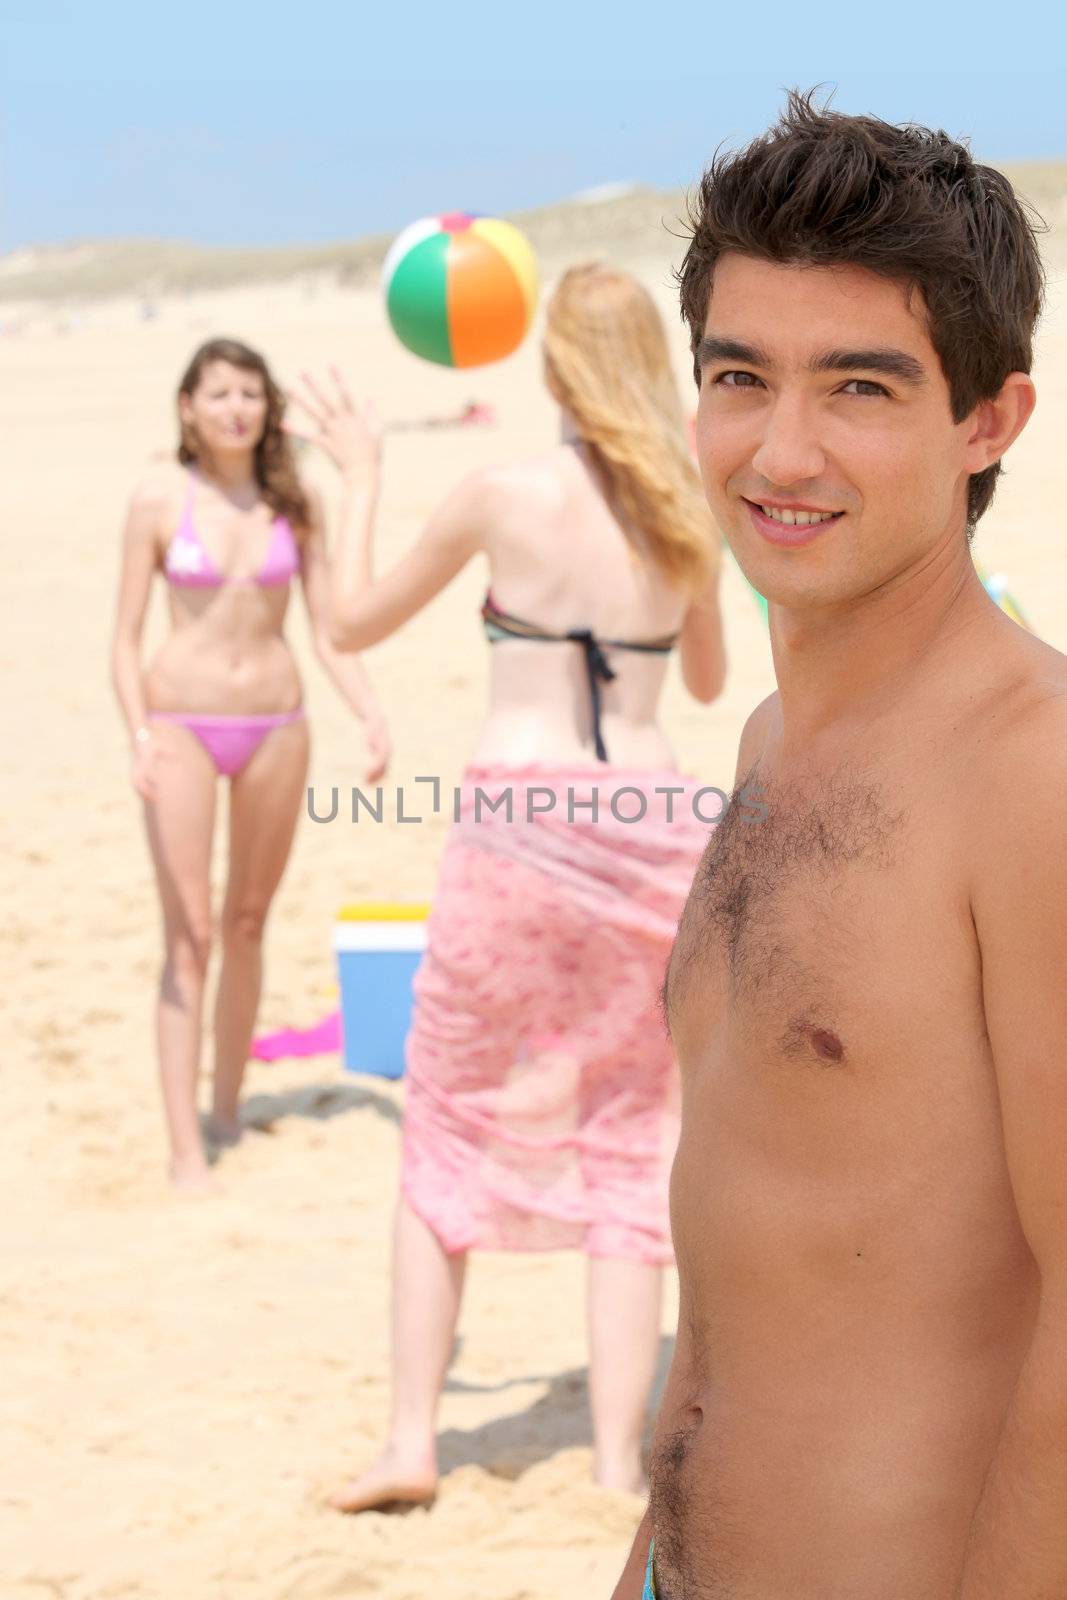 Three teenager playing with ball at the beach by phovoir